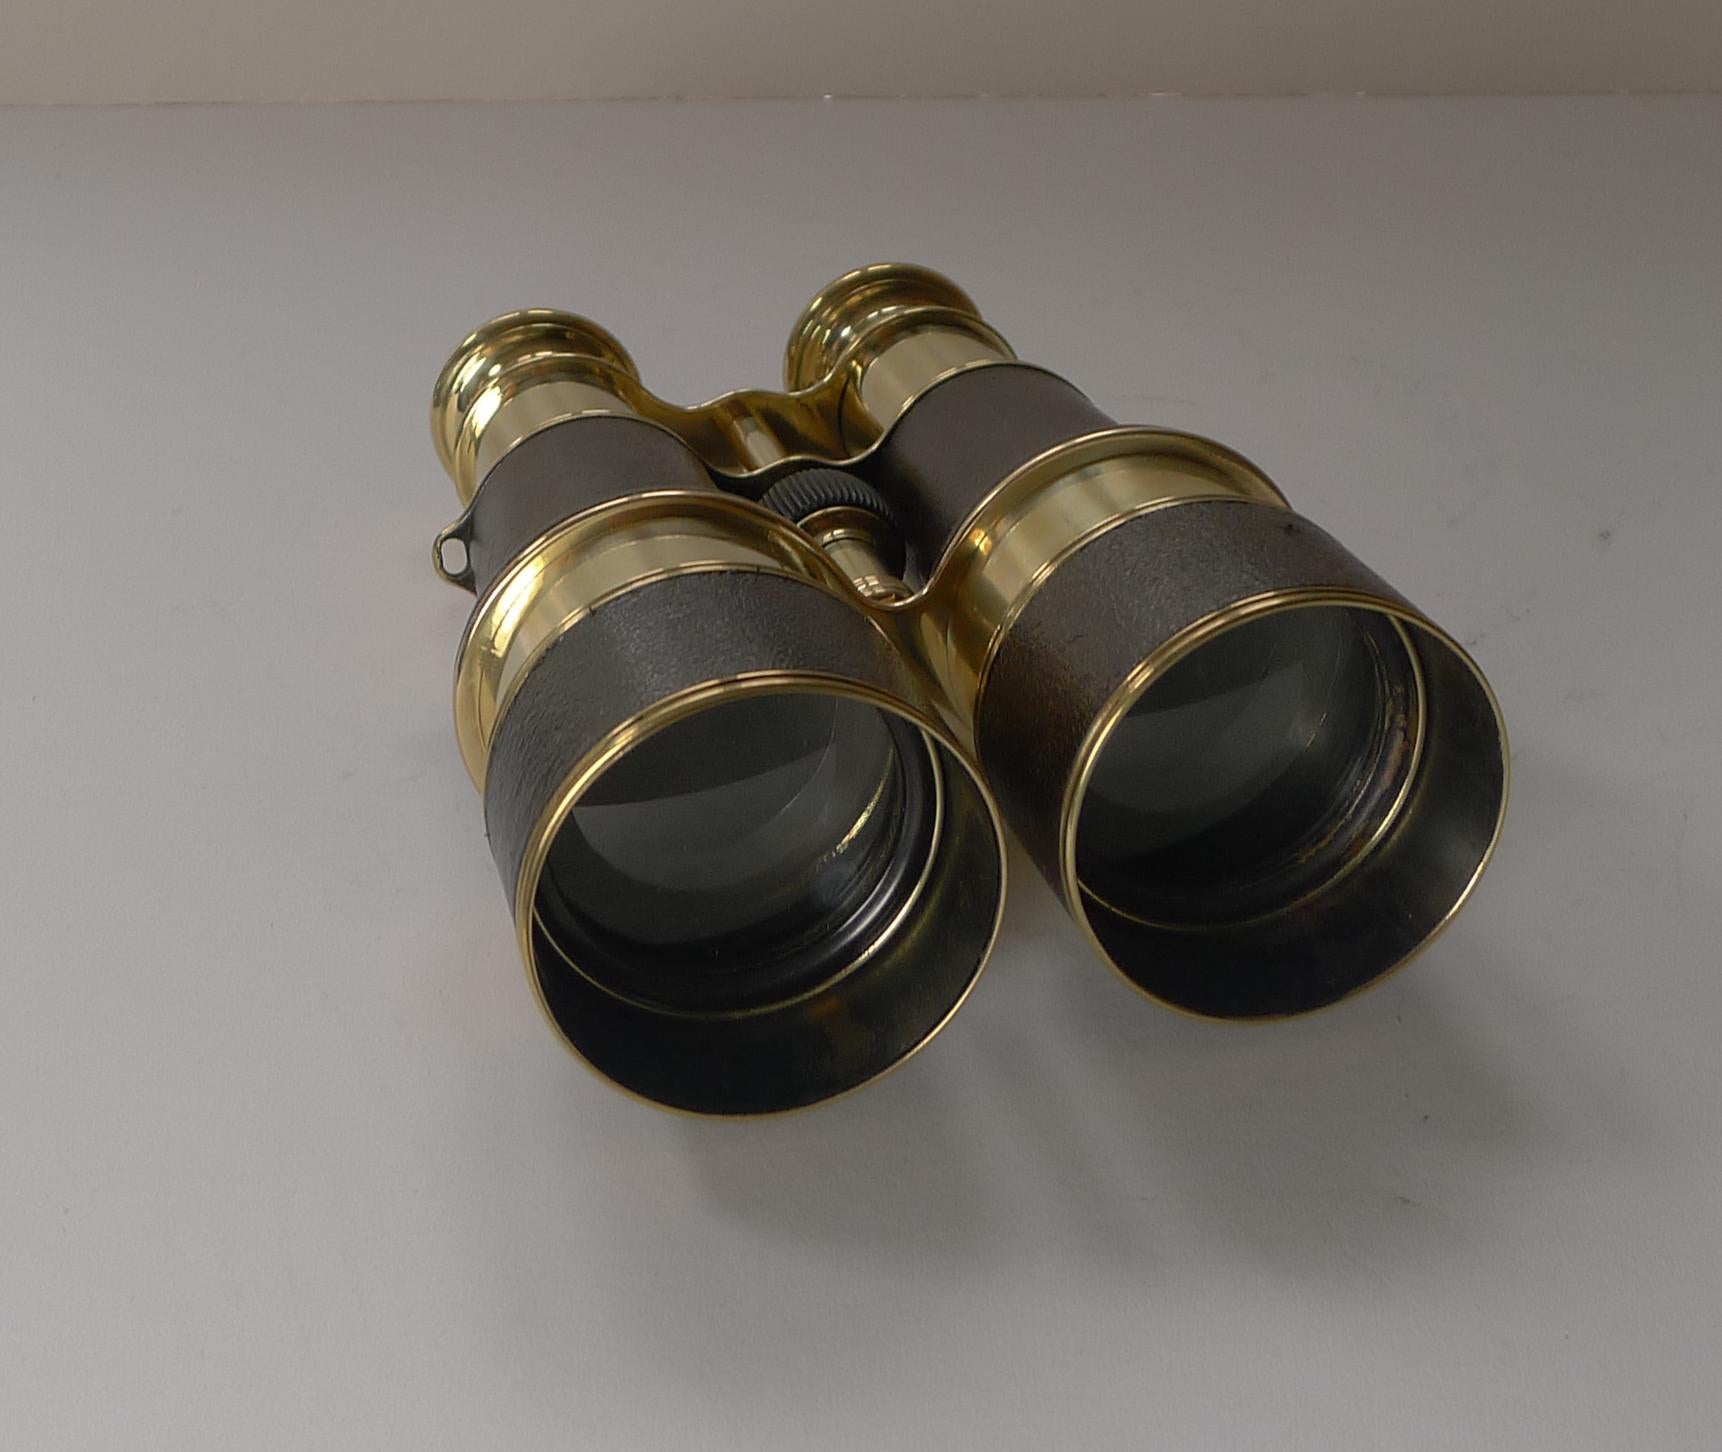 A fabulous pair of French made World War 1 British Officers Military binoculars with the brass on the binoculars stamped with the British military crows foot mark. They were manufactured by the creme de la creme of makers and signed on both